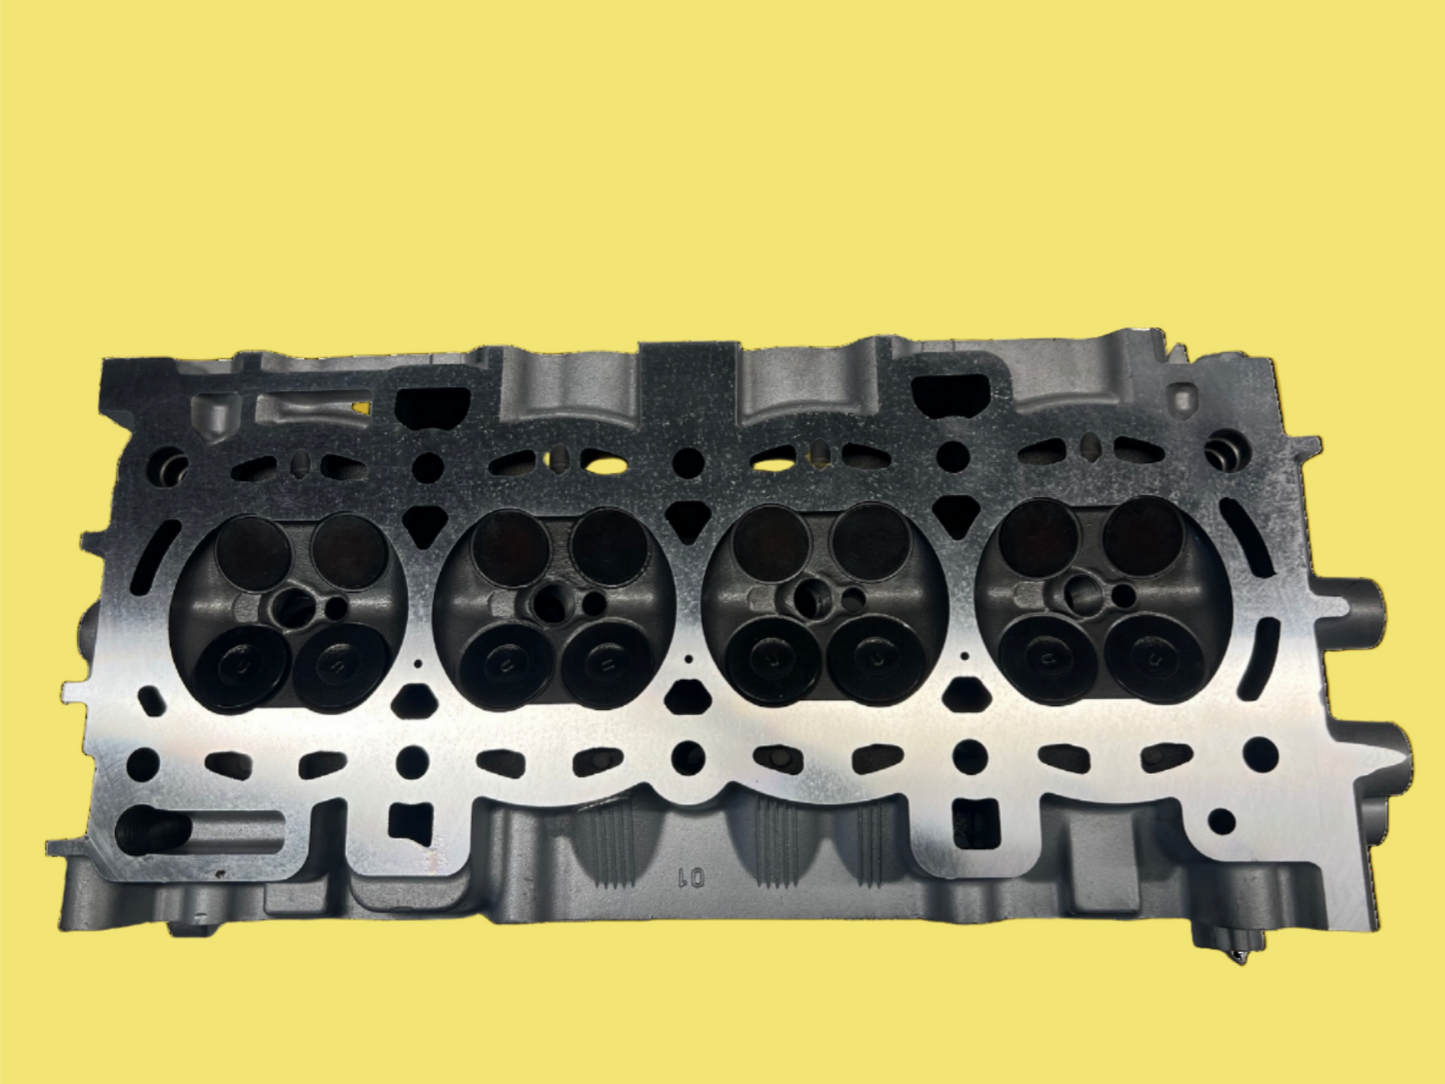 Bottom view of cylinder head for a Ford Fiesta 1.6L Casting #RFBM5G